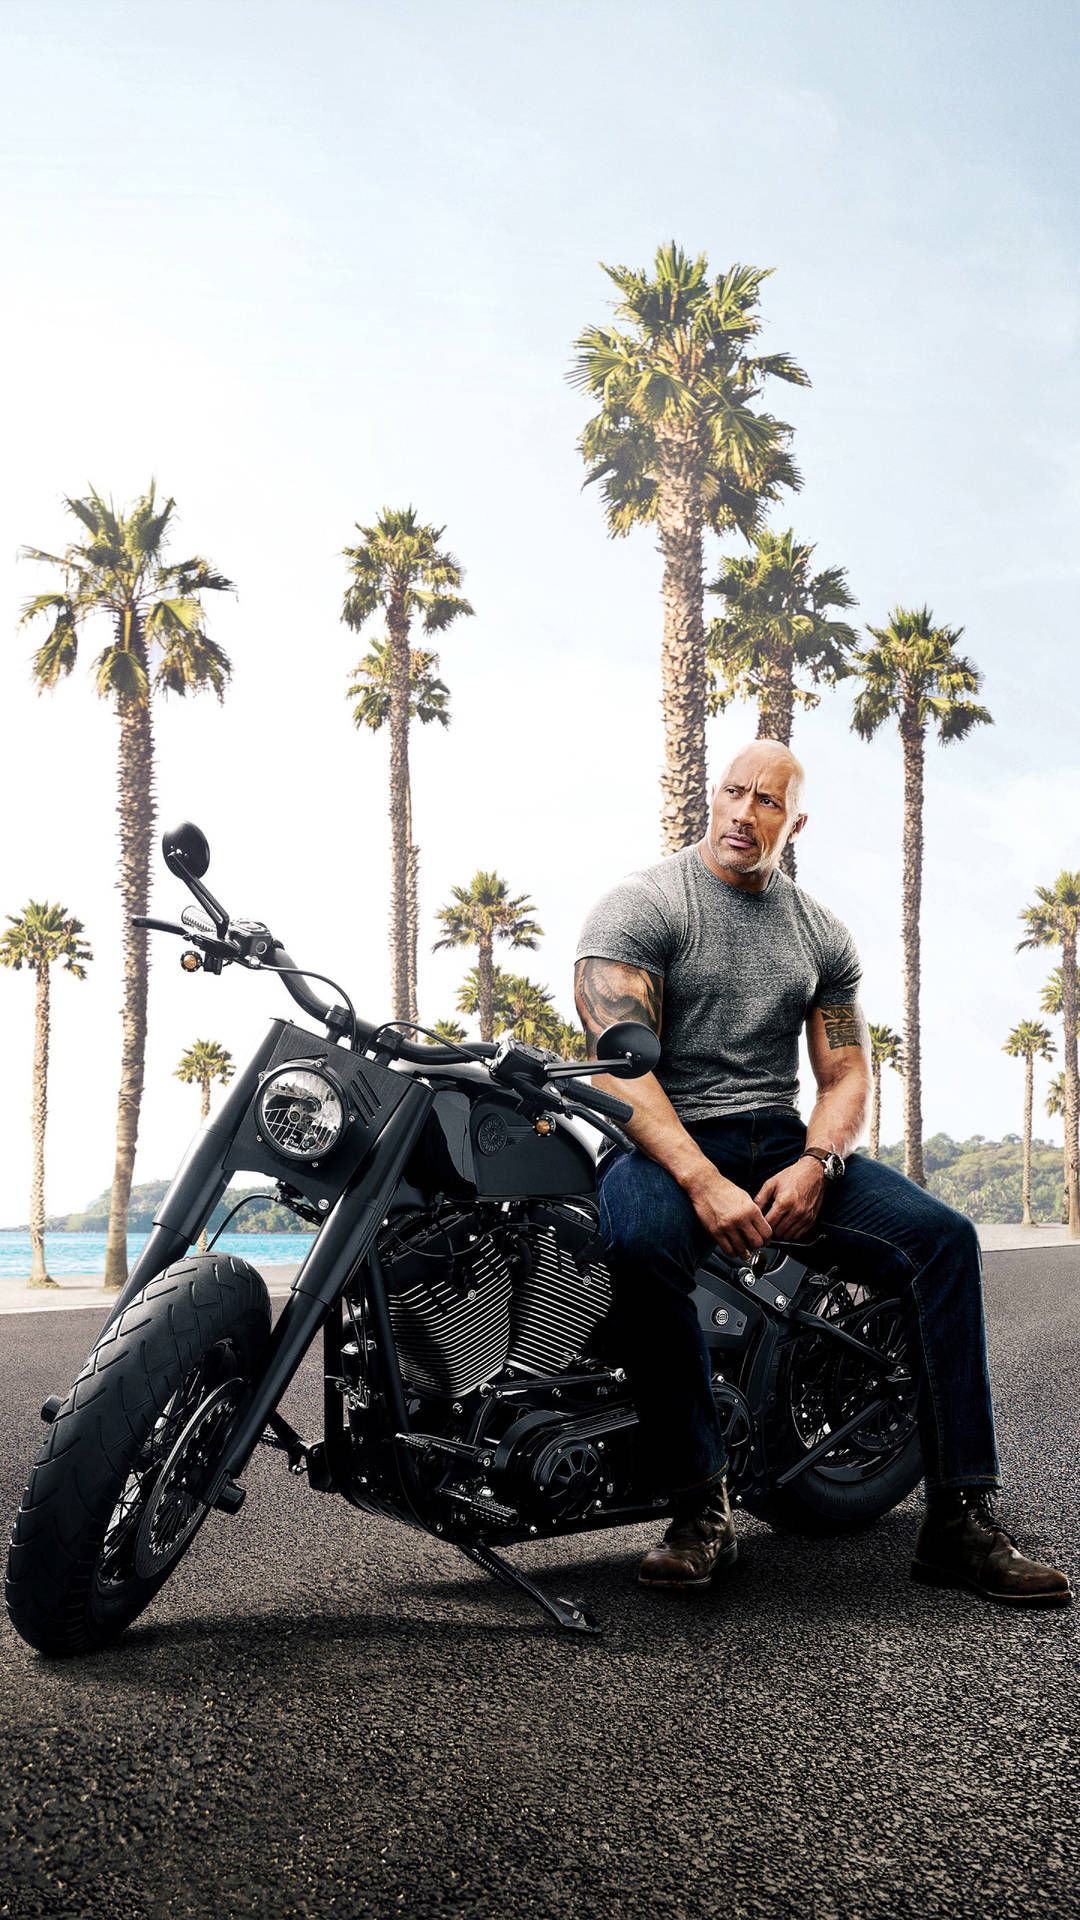 Dwayne Johnson In Hobbs And Shaw Background